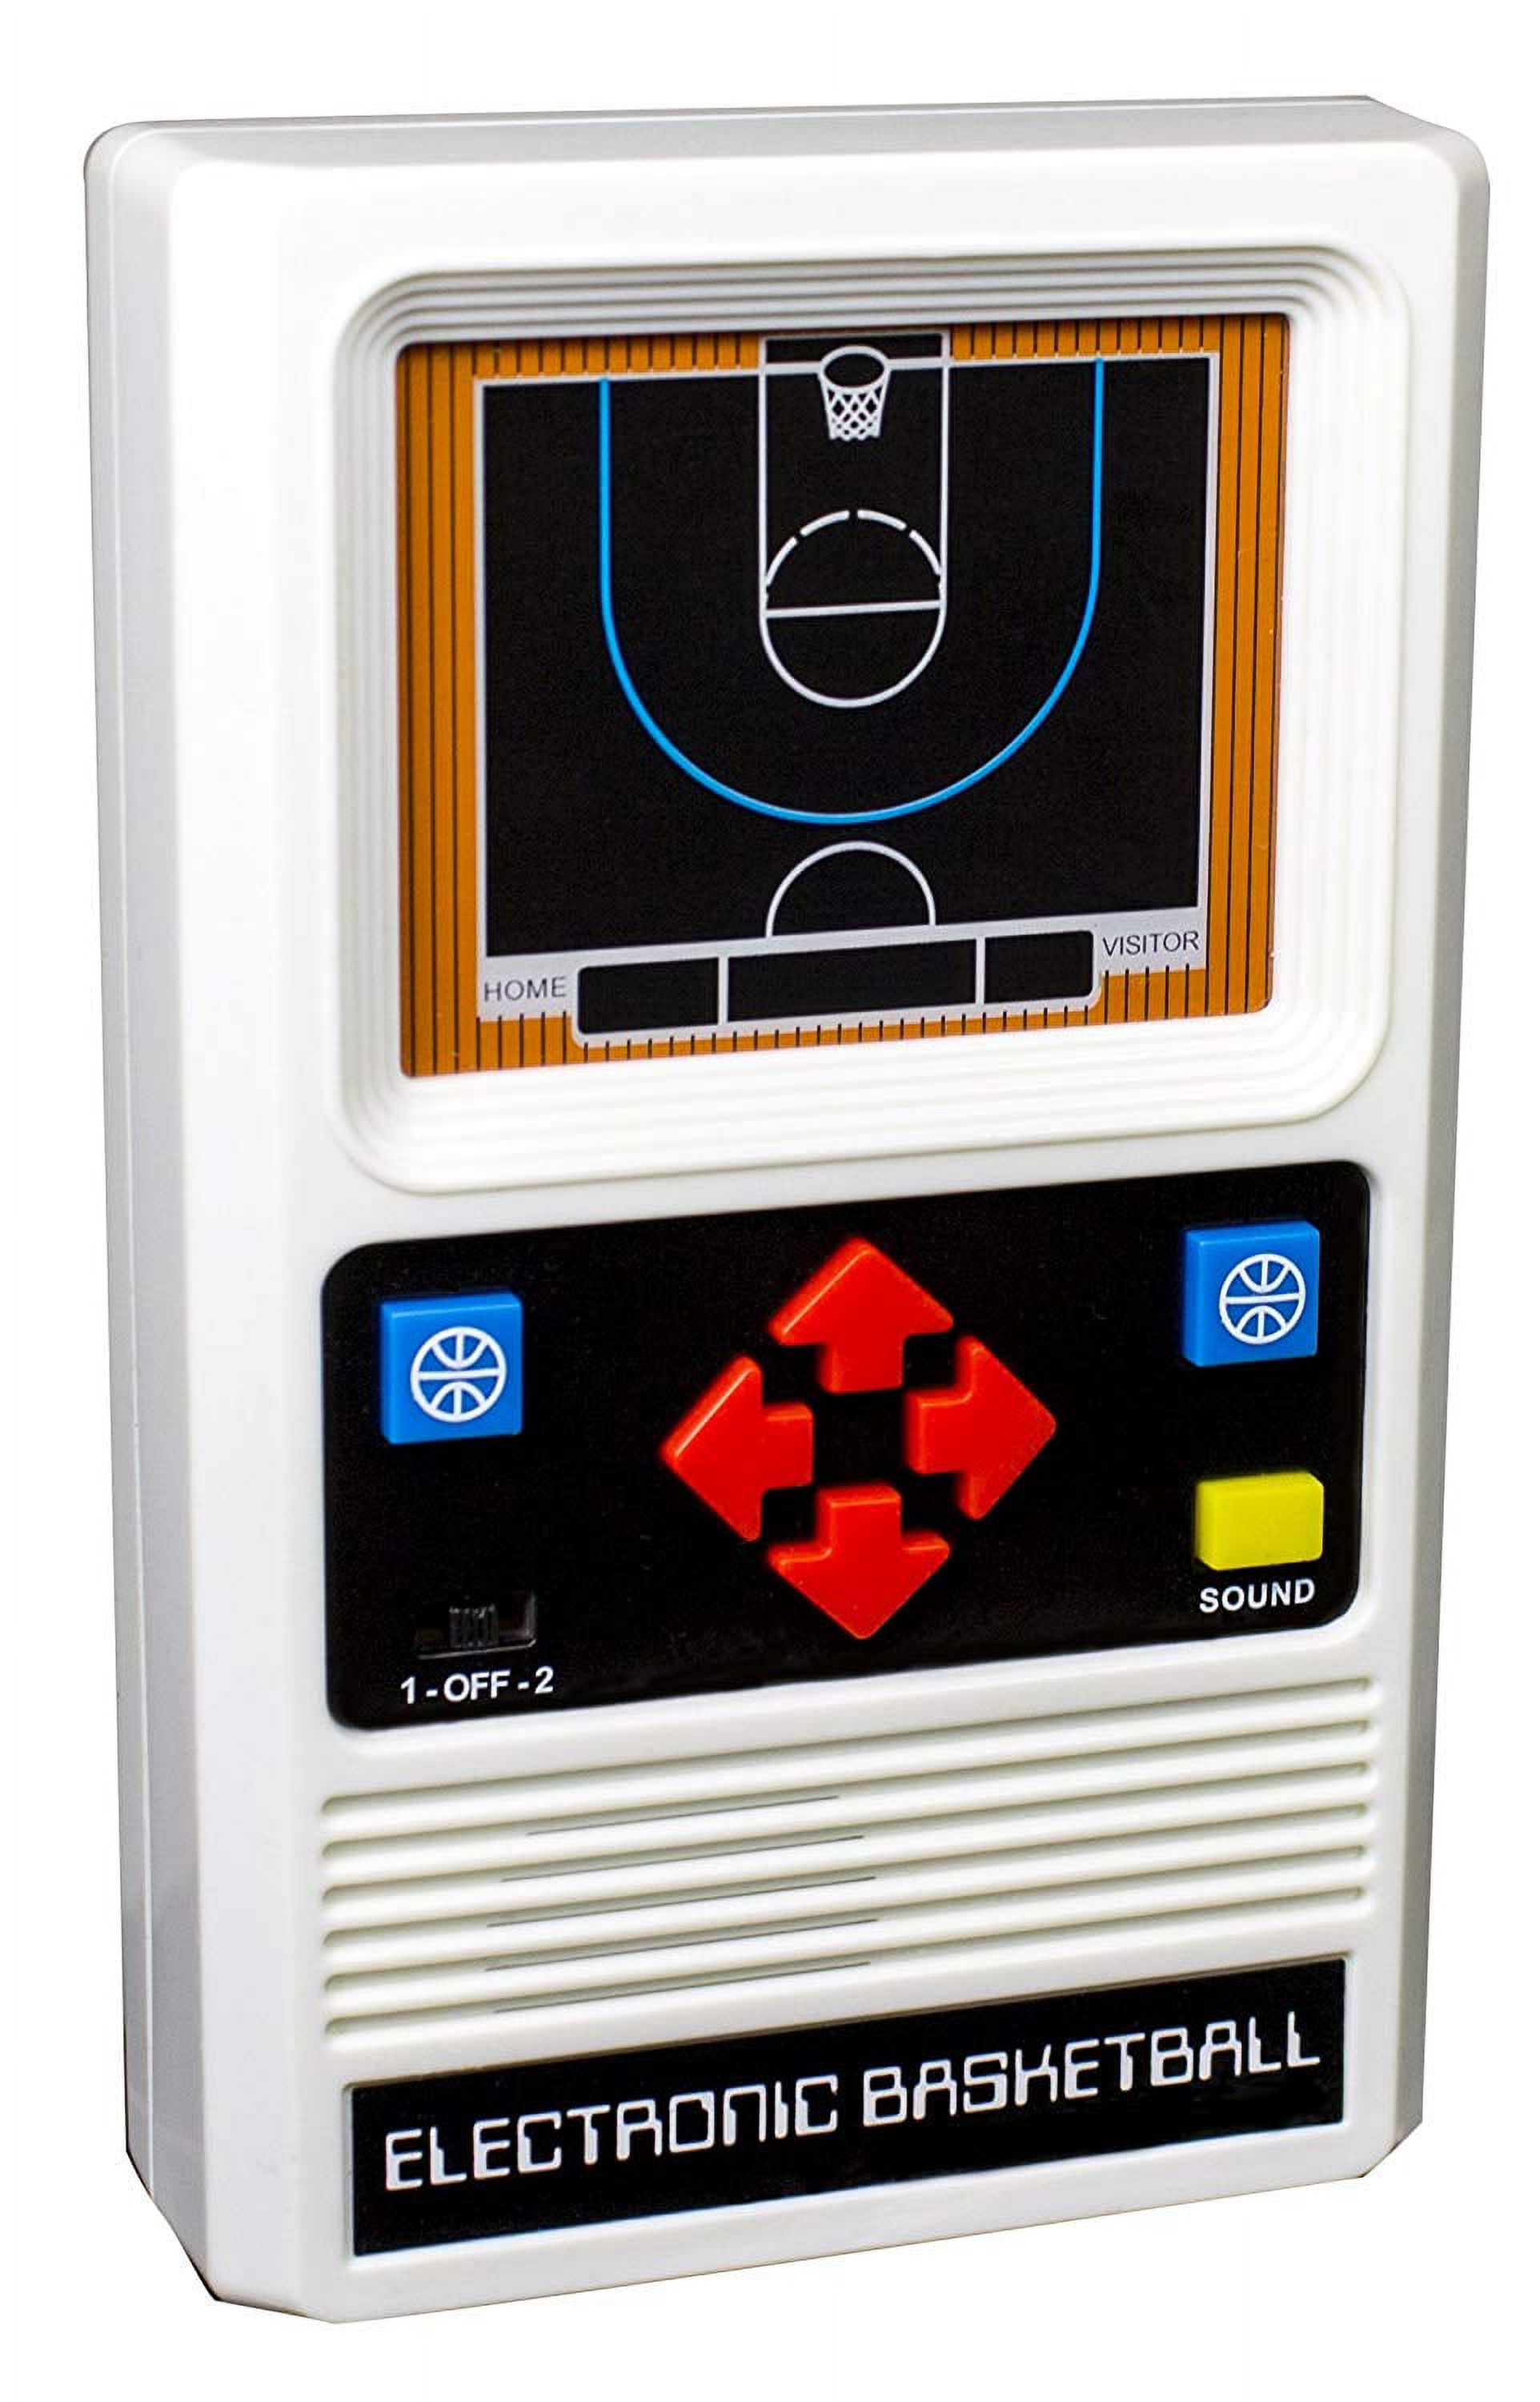 Electronic Retro Sports Game Assortment: Basketball Electronic Games - image 2 of 2